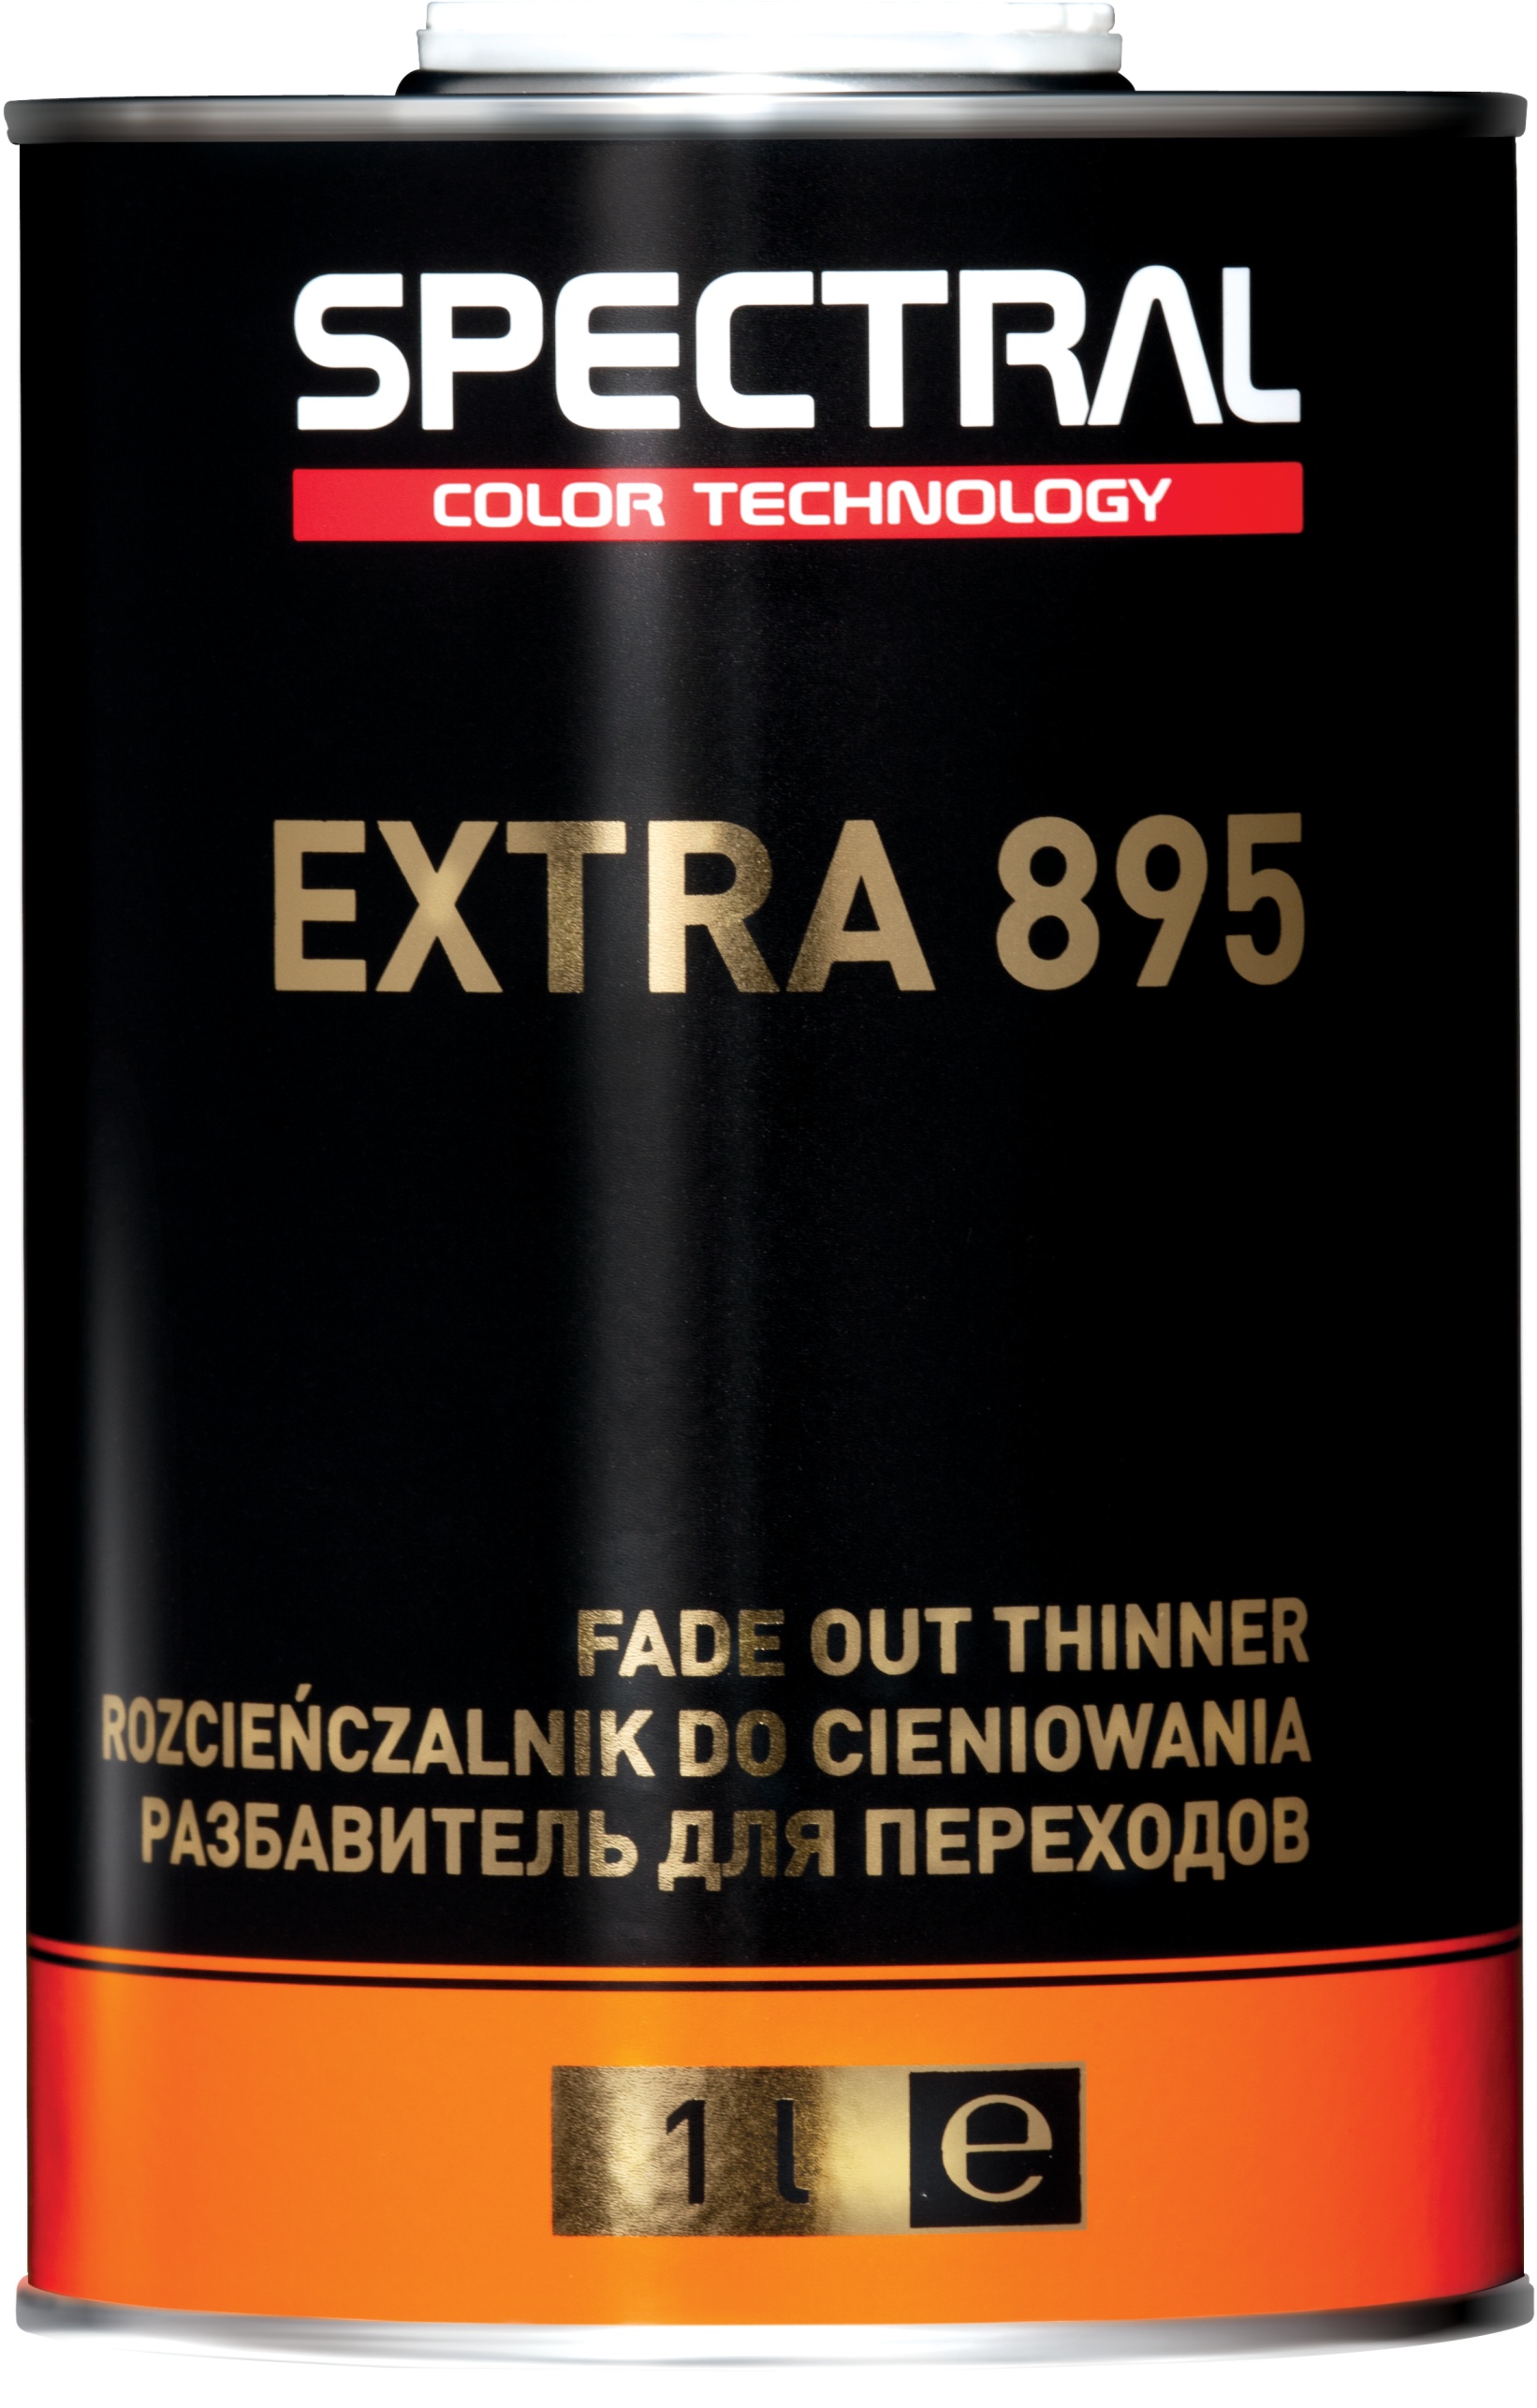 EXTRA 895 - Fade Out Thinner